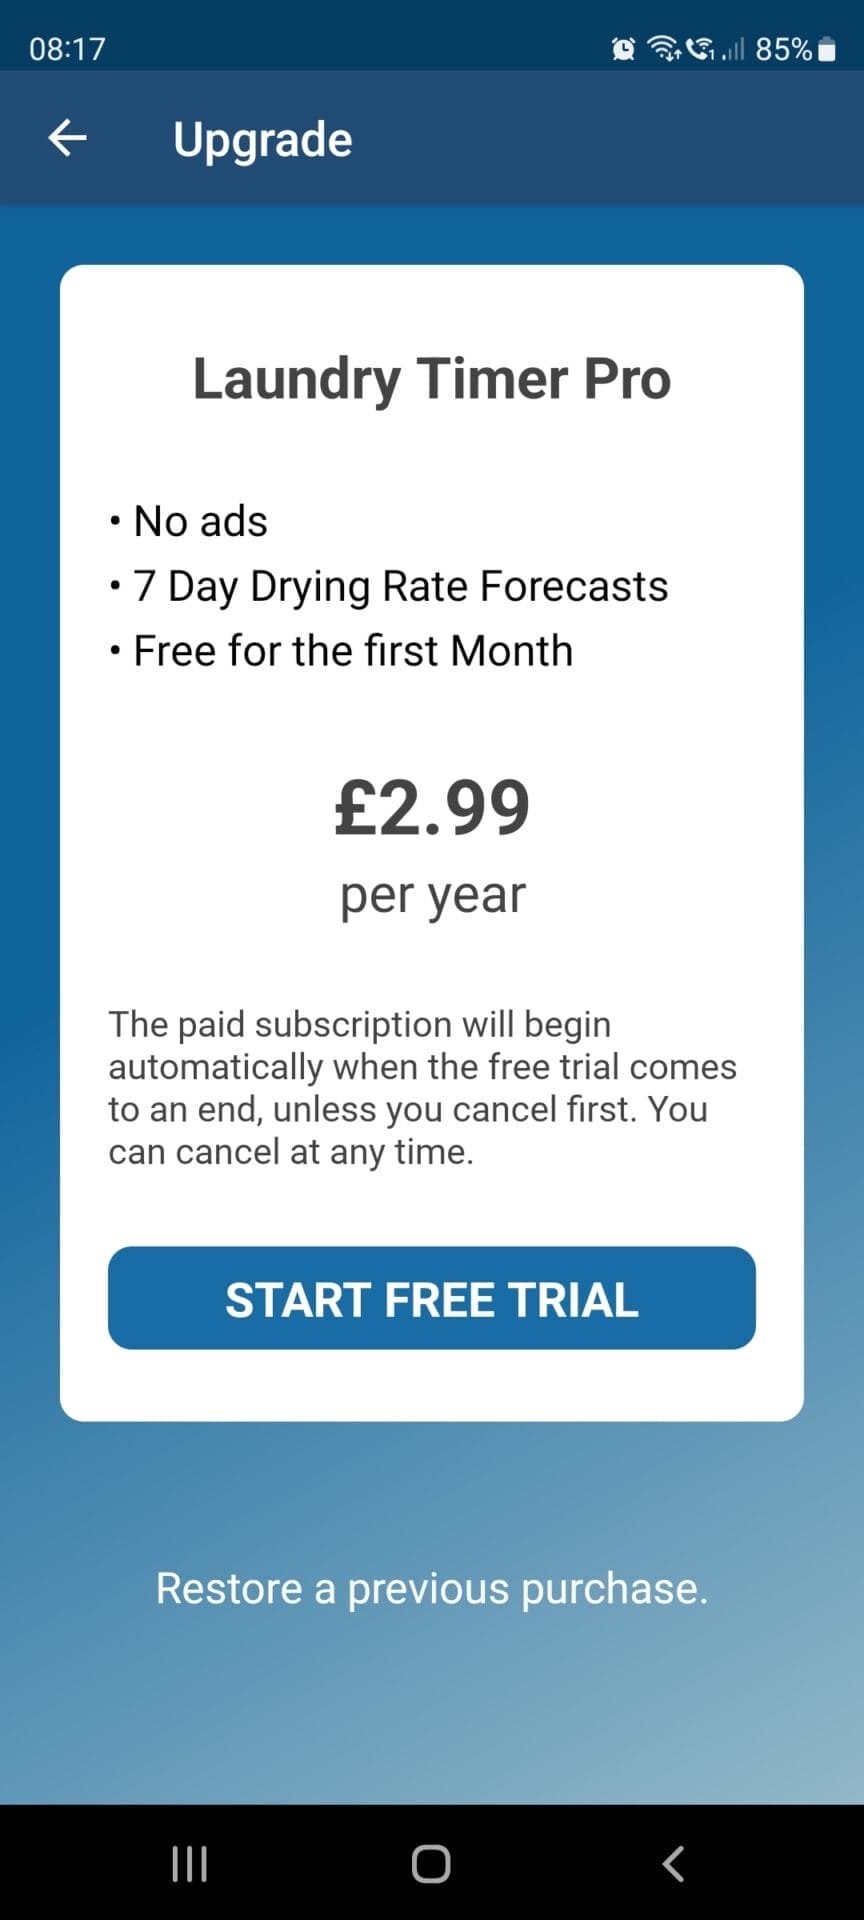 Image shows the screenshot for the Laundry Timer Pro subscription charge.